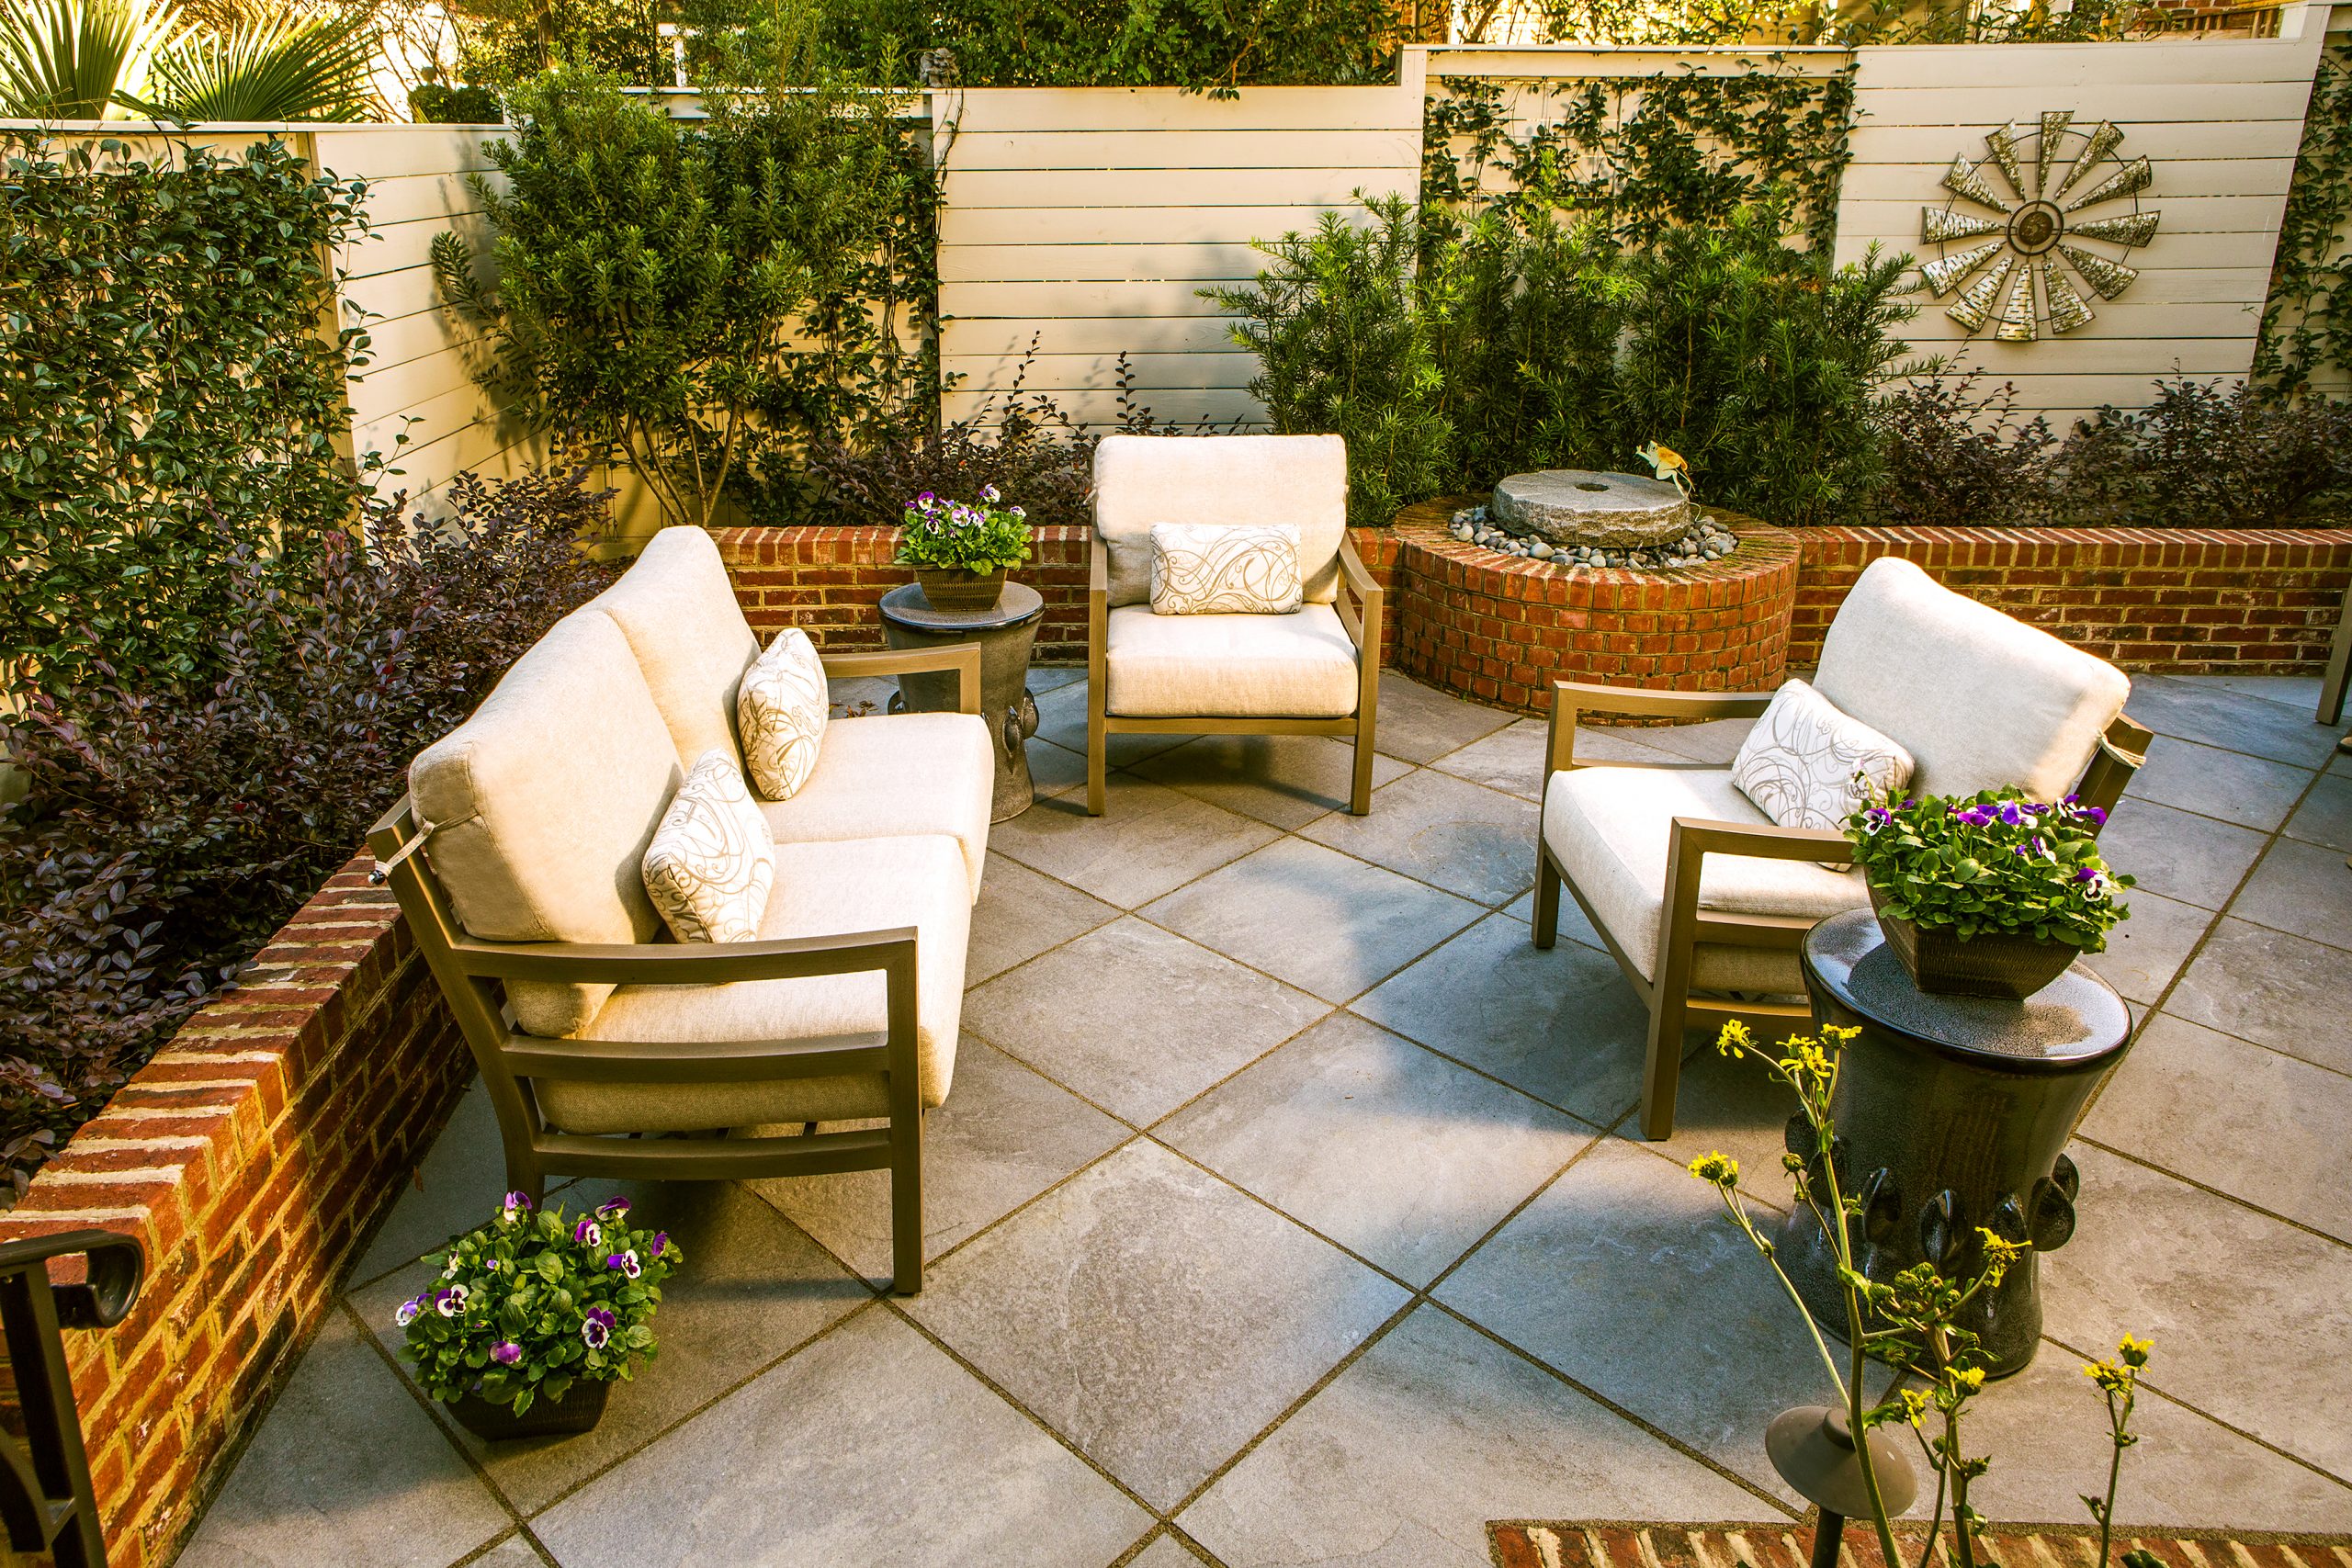 With the design help of Mark Cotterill of Grimball Cotterill Landscape Architects and Steven Ford, Della designed her back courtyard to create solitude and privacy. At the bottom of the steps, a comfortable seating area awaits by the lime tree her children — Alan, Kallie, and Zachary Eisenman — gave her for Mother’s Day. A low red brick wall defines planting beds backed by a shiplap fence, softened by a round metal sculpture. While the garden has many beautiful features, the fountain made of thick granite millstone is one of her favorites. 
